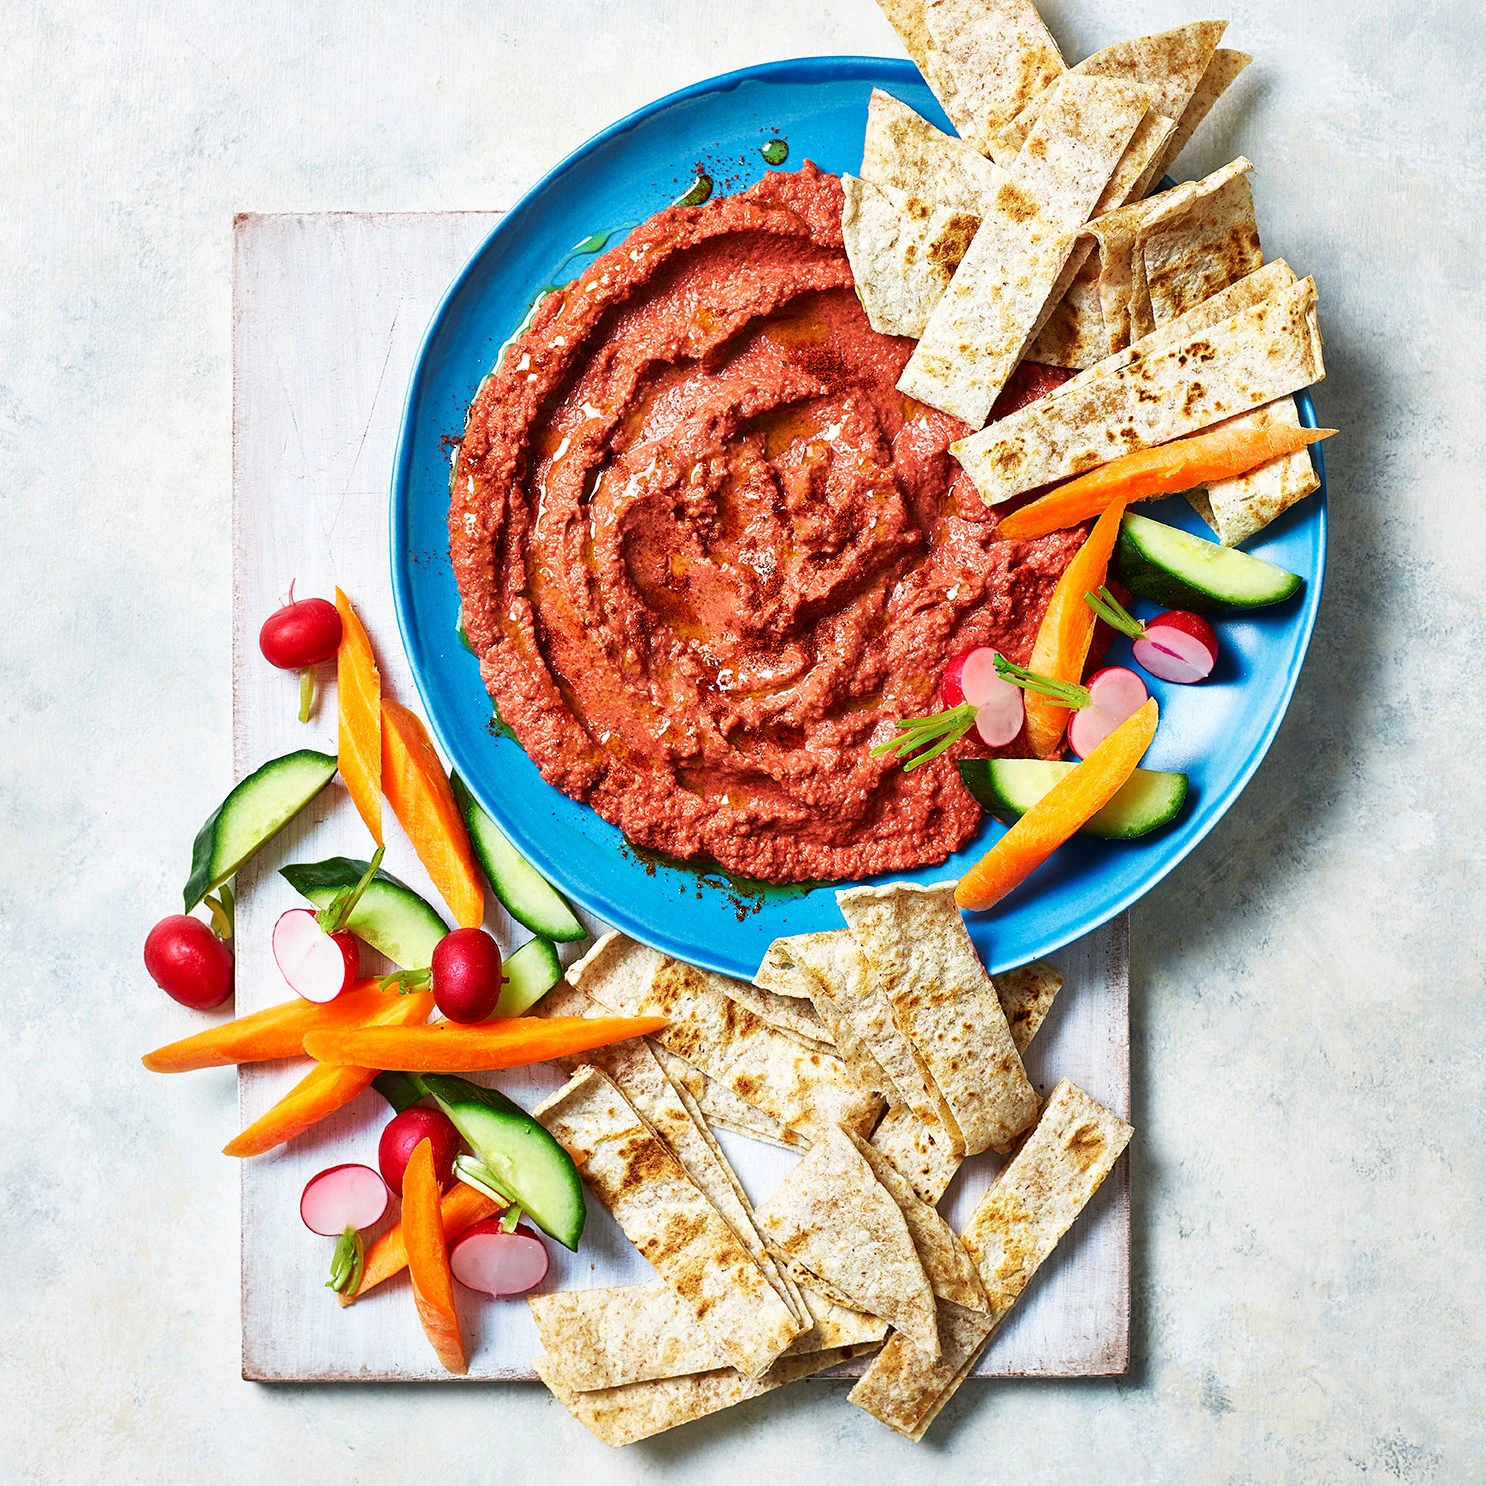 A bowl of beetroot hummus is pictured from above. Scattered around the edge of the bowl are slices of Organic Wholeblend Piadina and vegetable crudités.